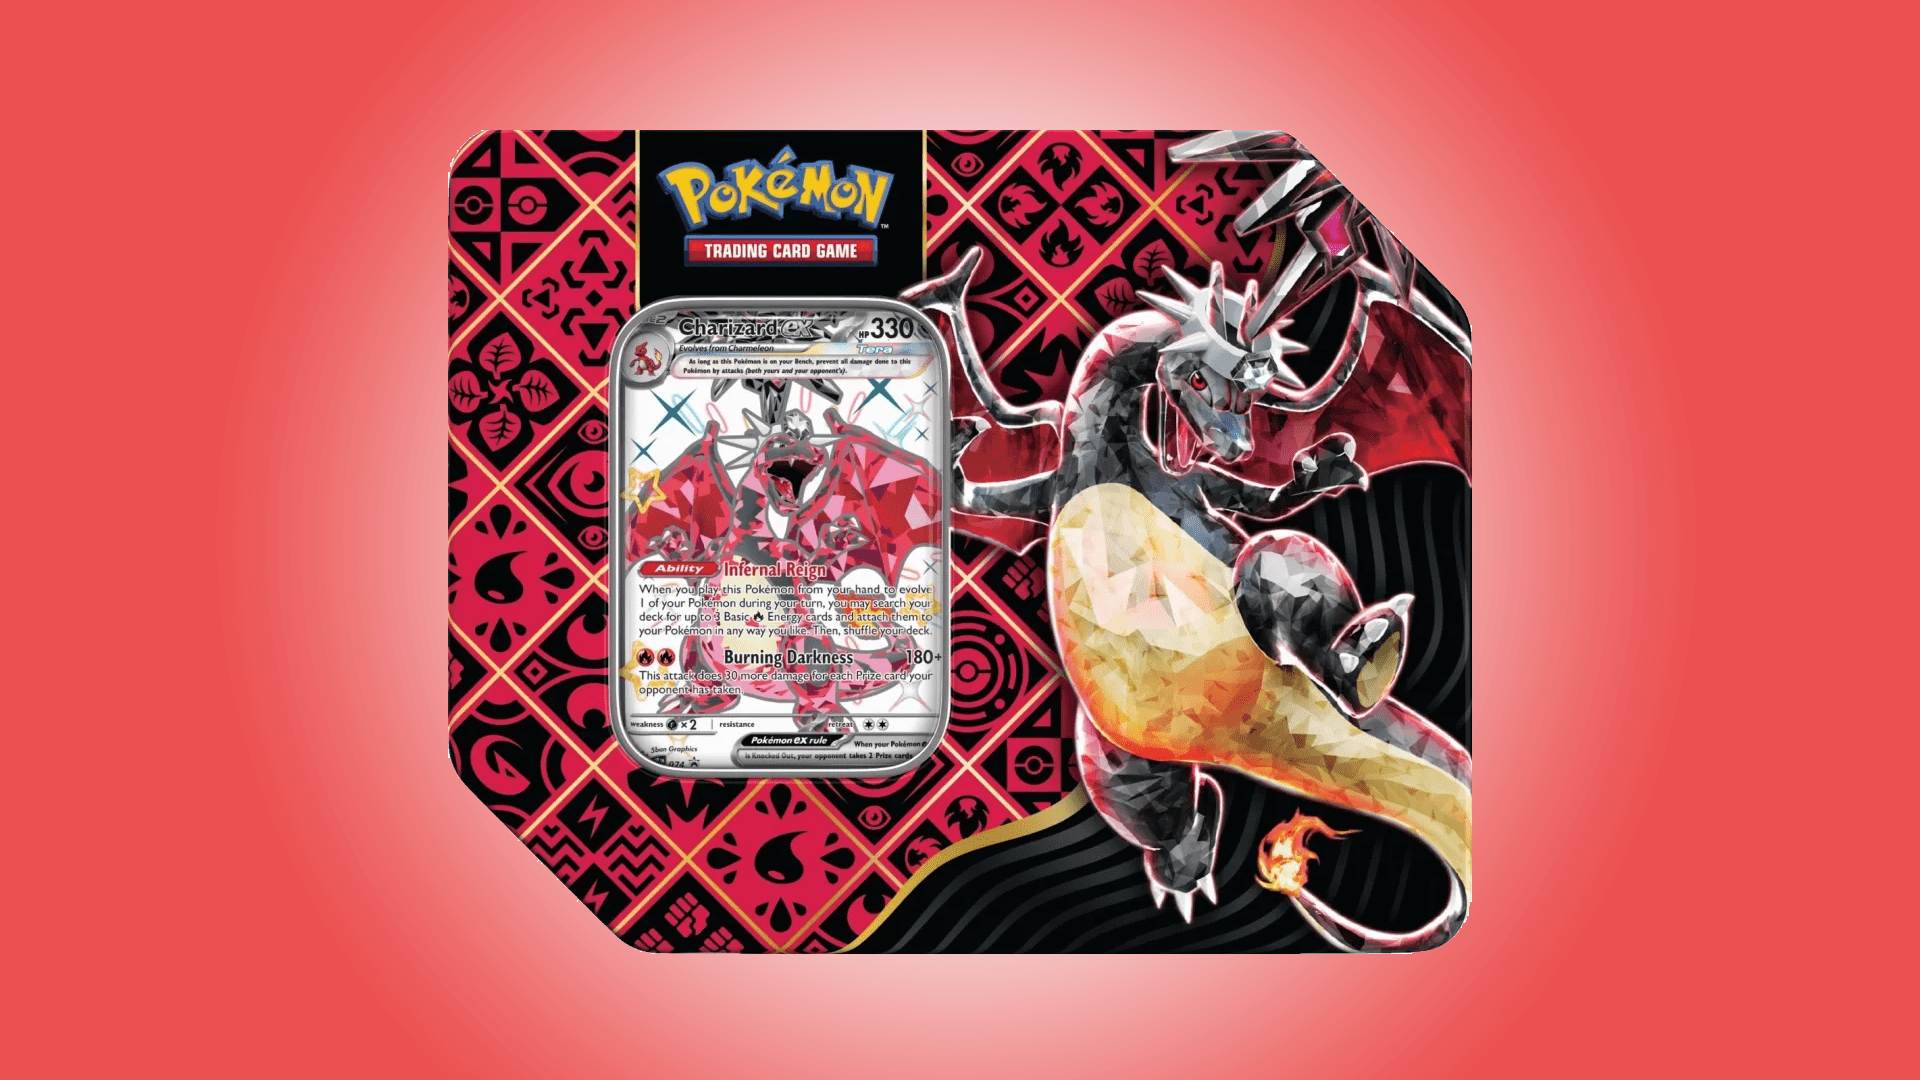 Shiny Charizard, Great Tusk, Iron Treads Paldean Fates ex Tins: Release Date, Price, Pre-Order, Where To Buy, What Packs Are Inside And Is It Worth It?